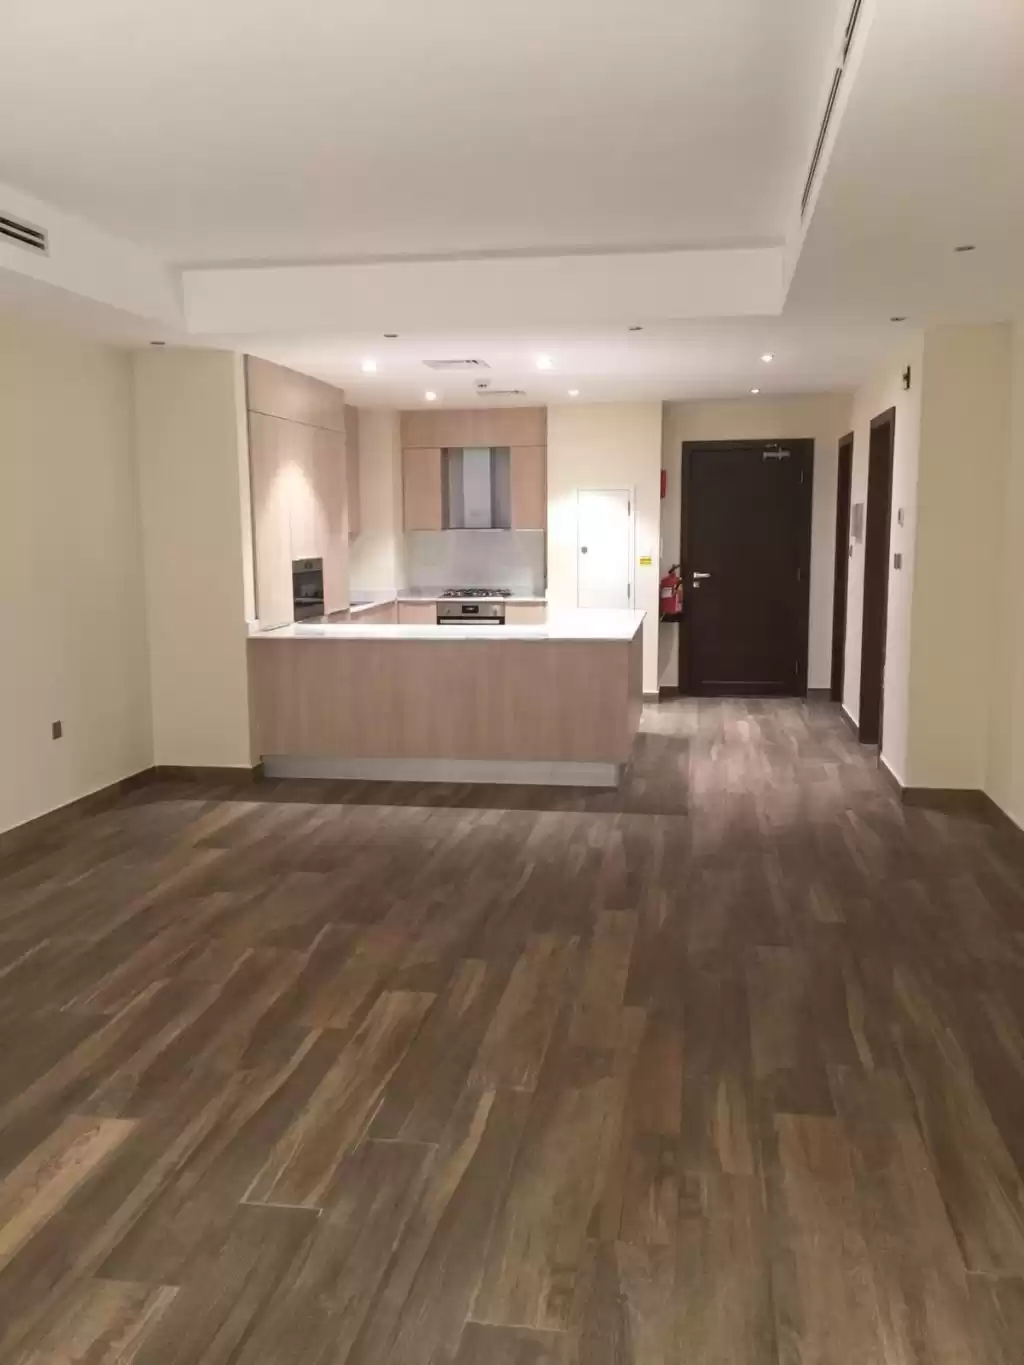 Residential Ready Property 1 Bedroom S/F Apartment  for rent in Al Sadd , Doha #10523 - 1  image 